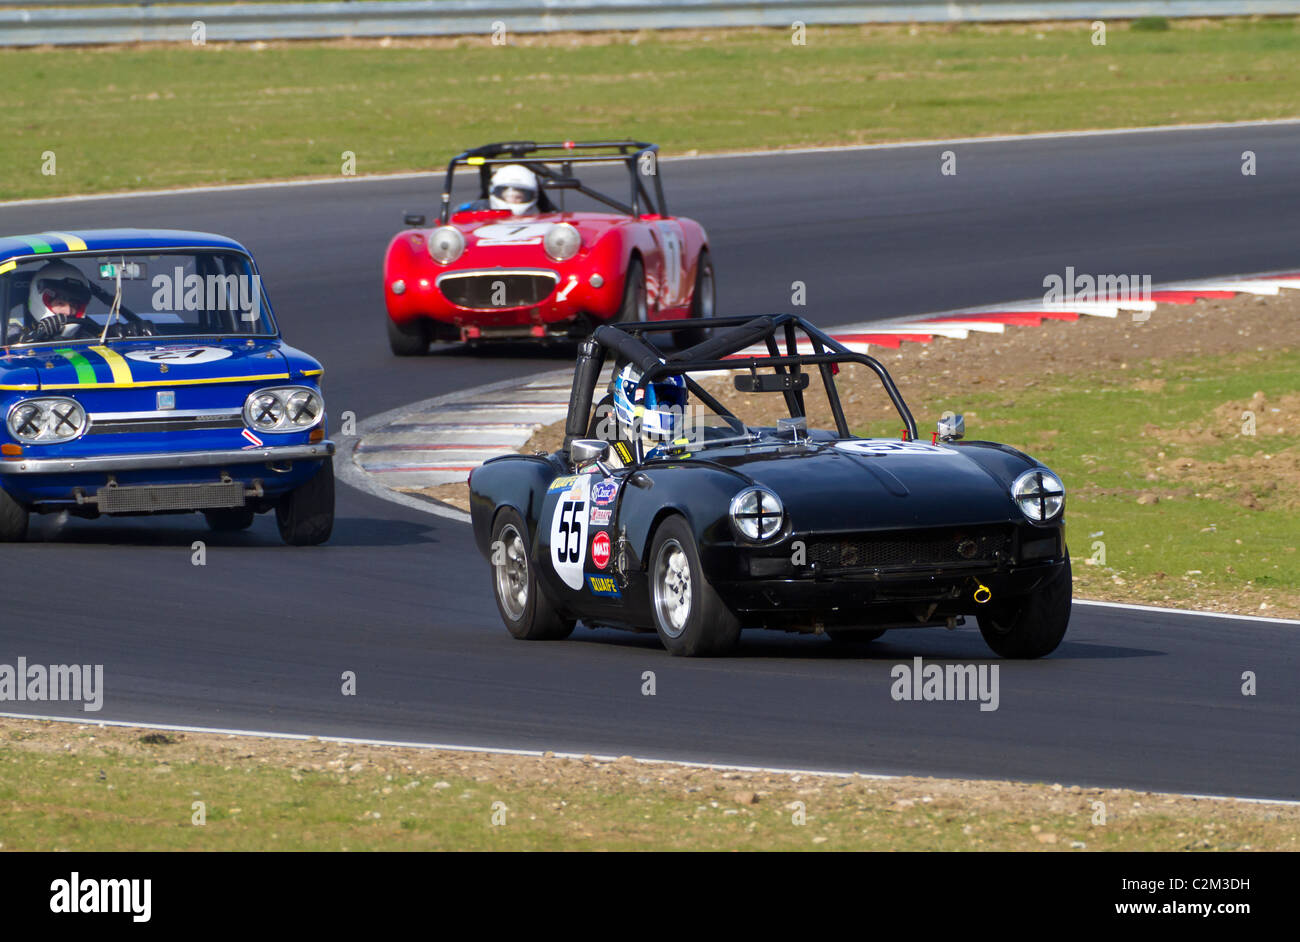 1968 Triumph Spitfire Mk3 of Steve Adams leads the NSU and Frogeye Sprite during the CSCC Swinging Sixties race, Snetterton, UK. Stock Photo